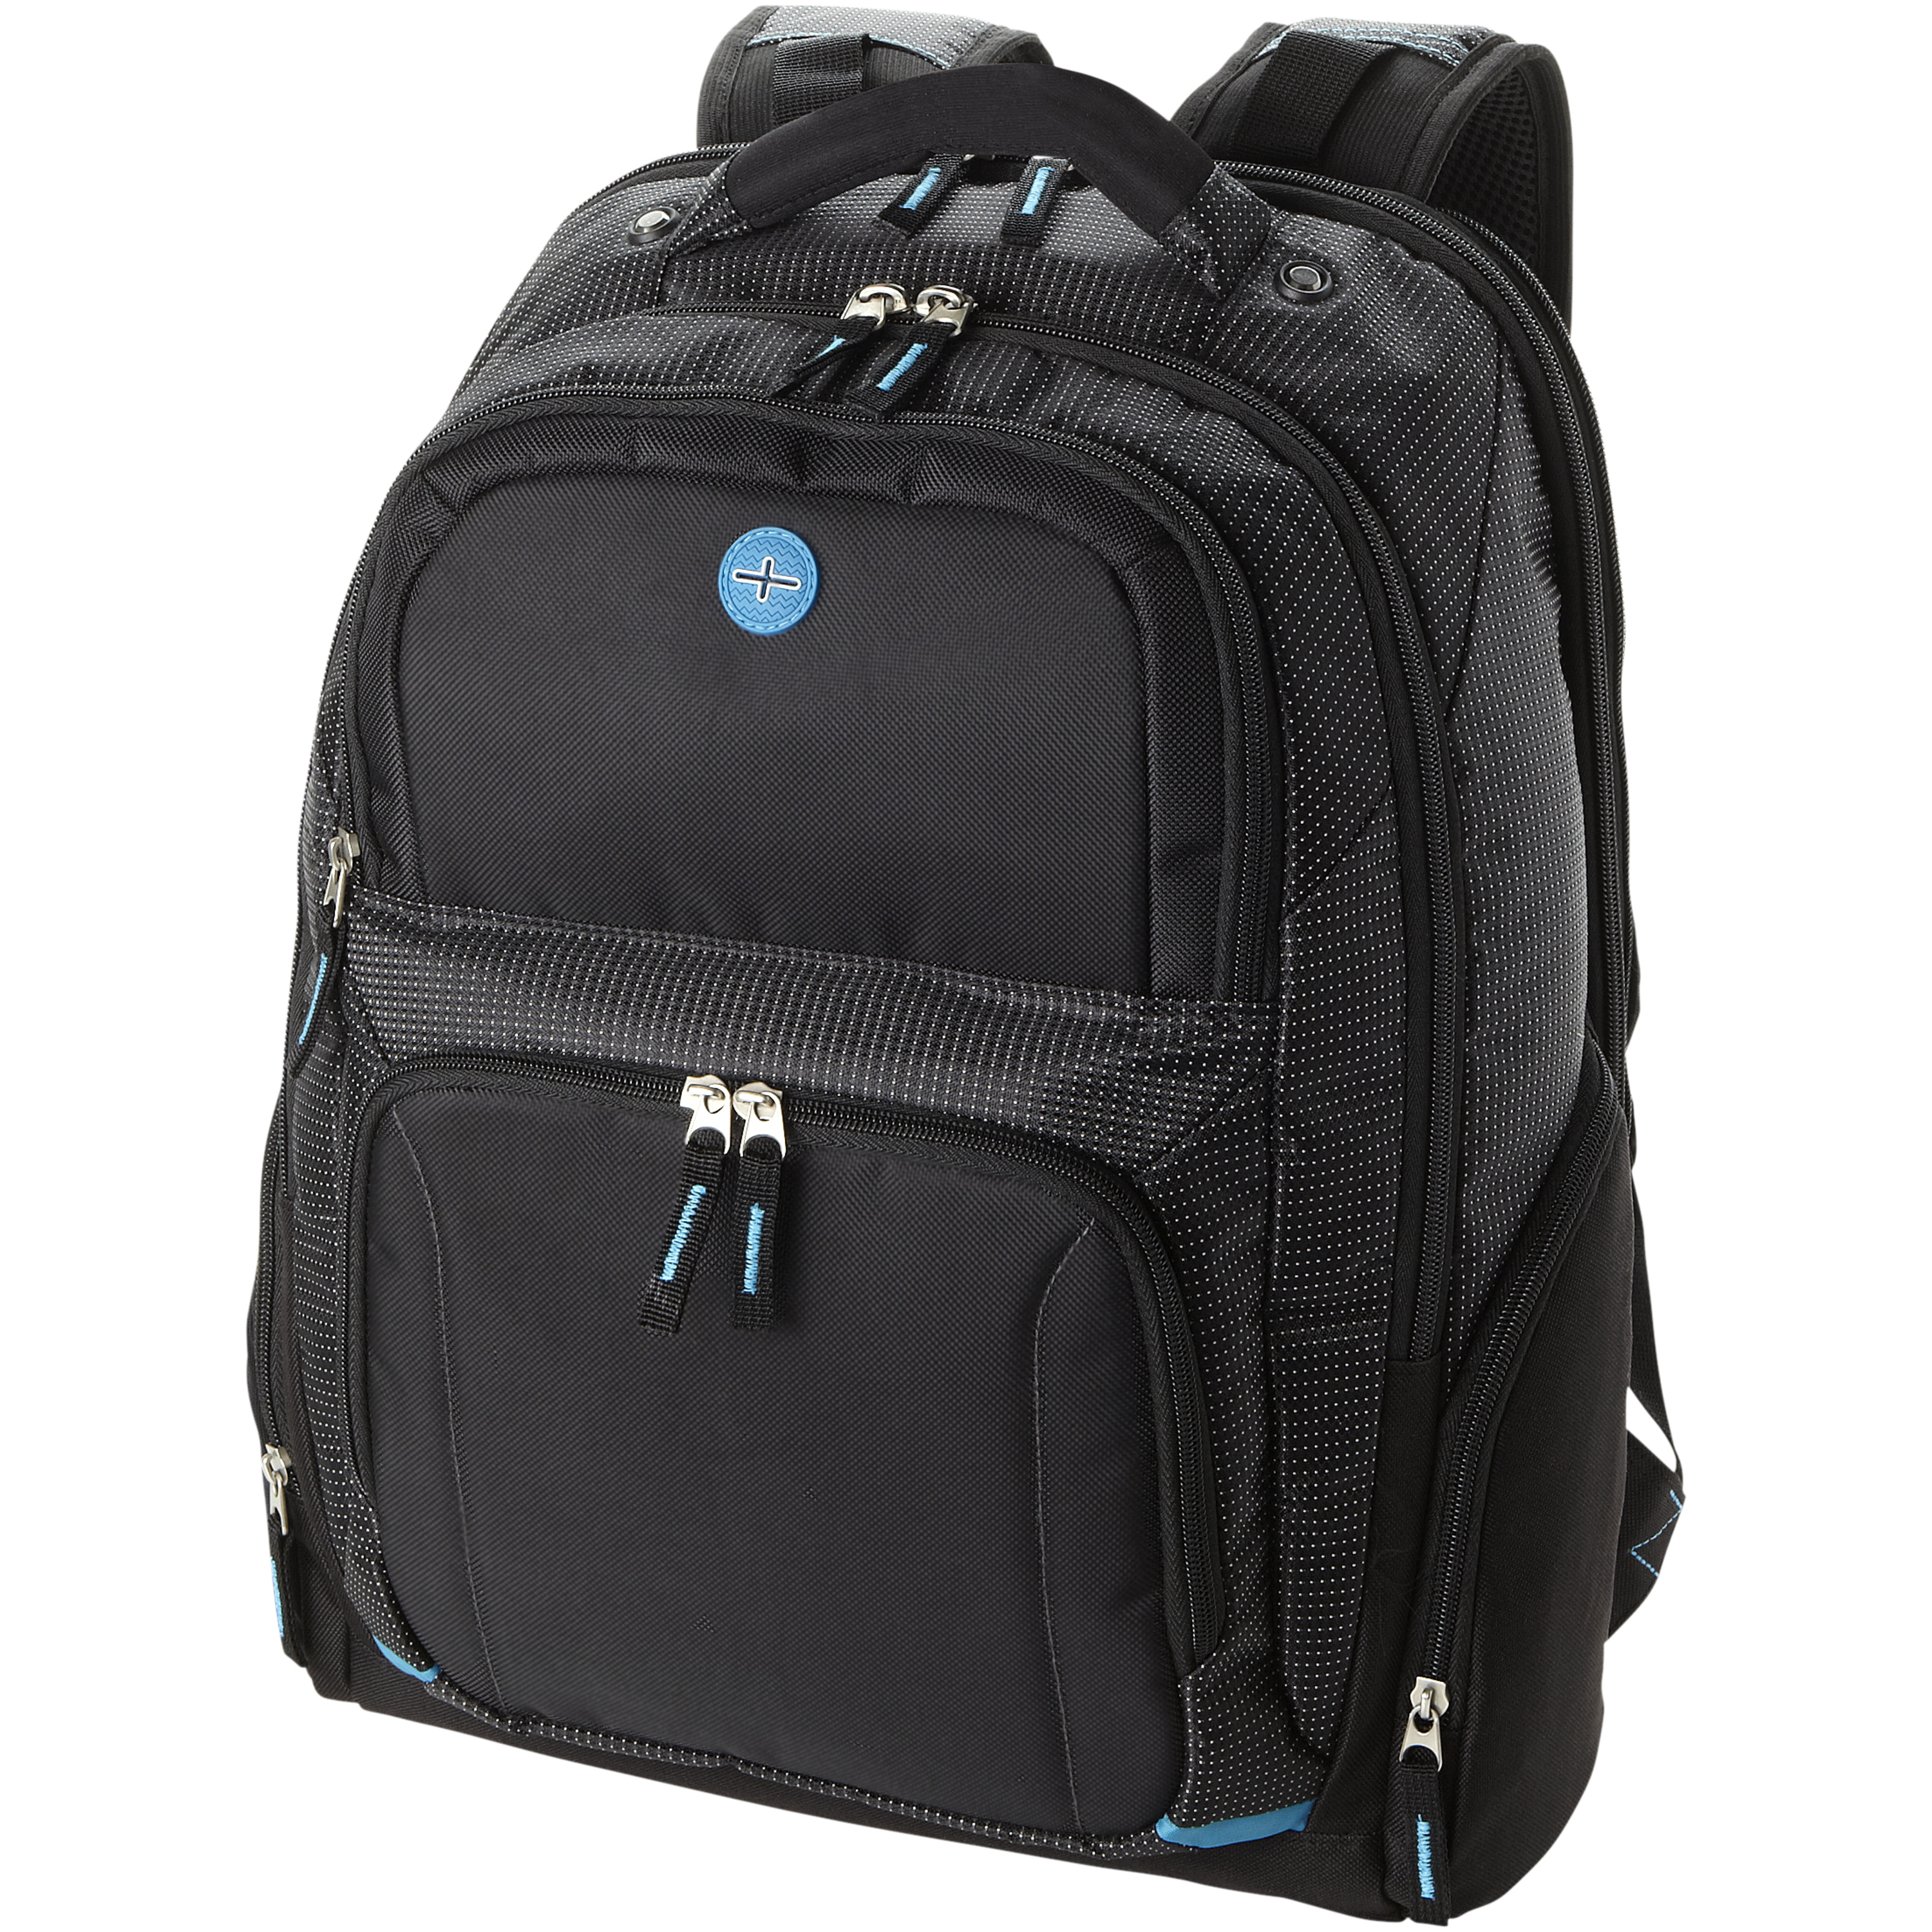 TY 15.4" checkpoint friendly laptop backpack 23L